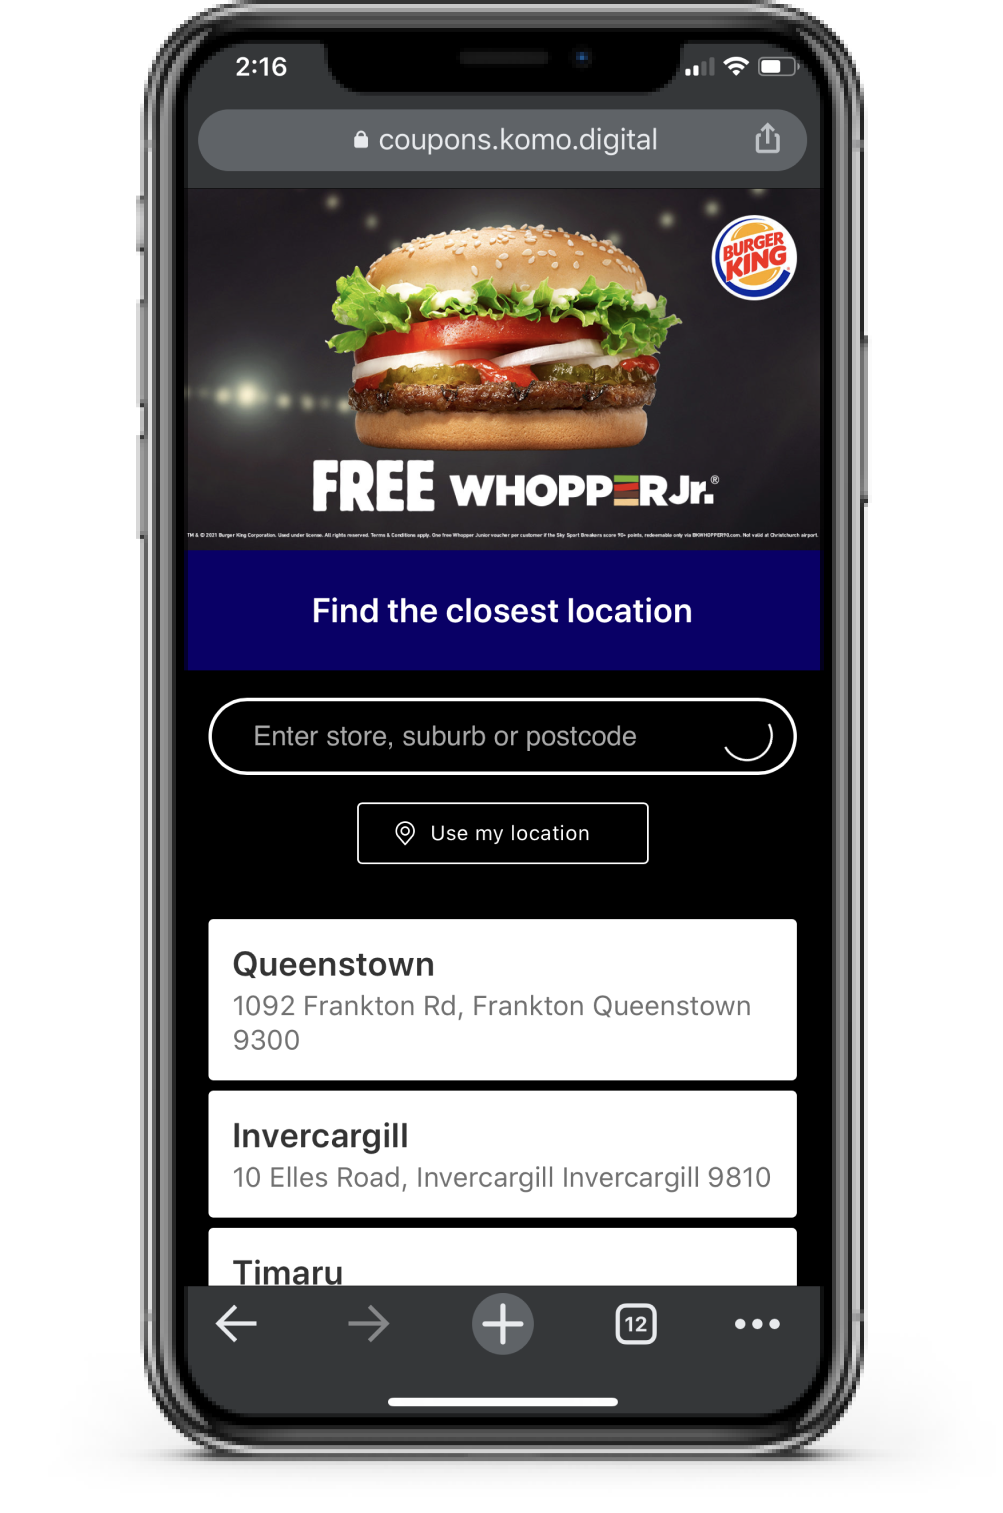 Burger King and Sky Sports NZ Breakers, Digital Coupons